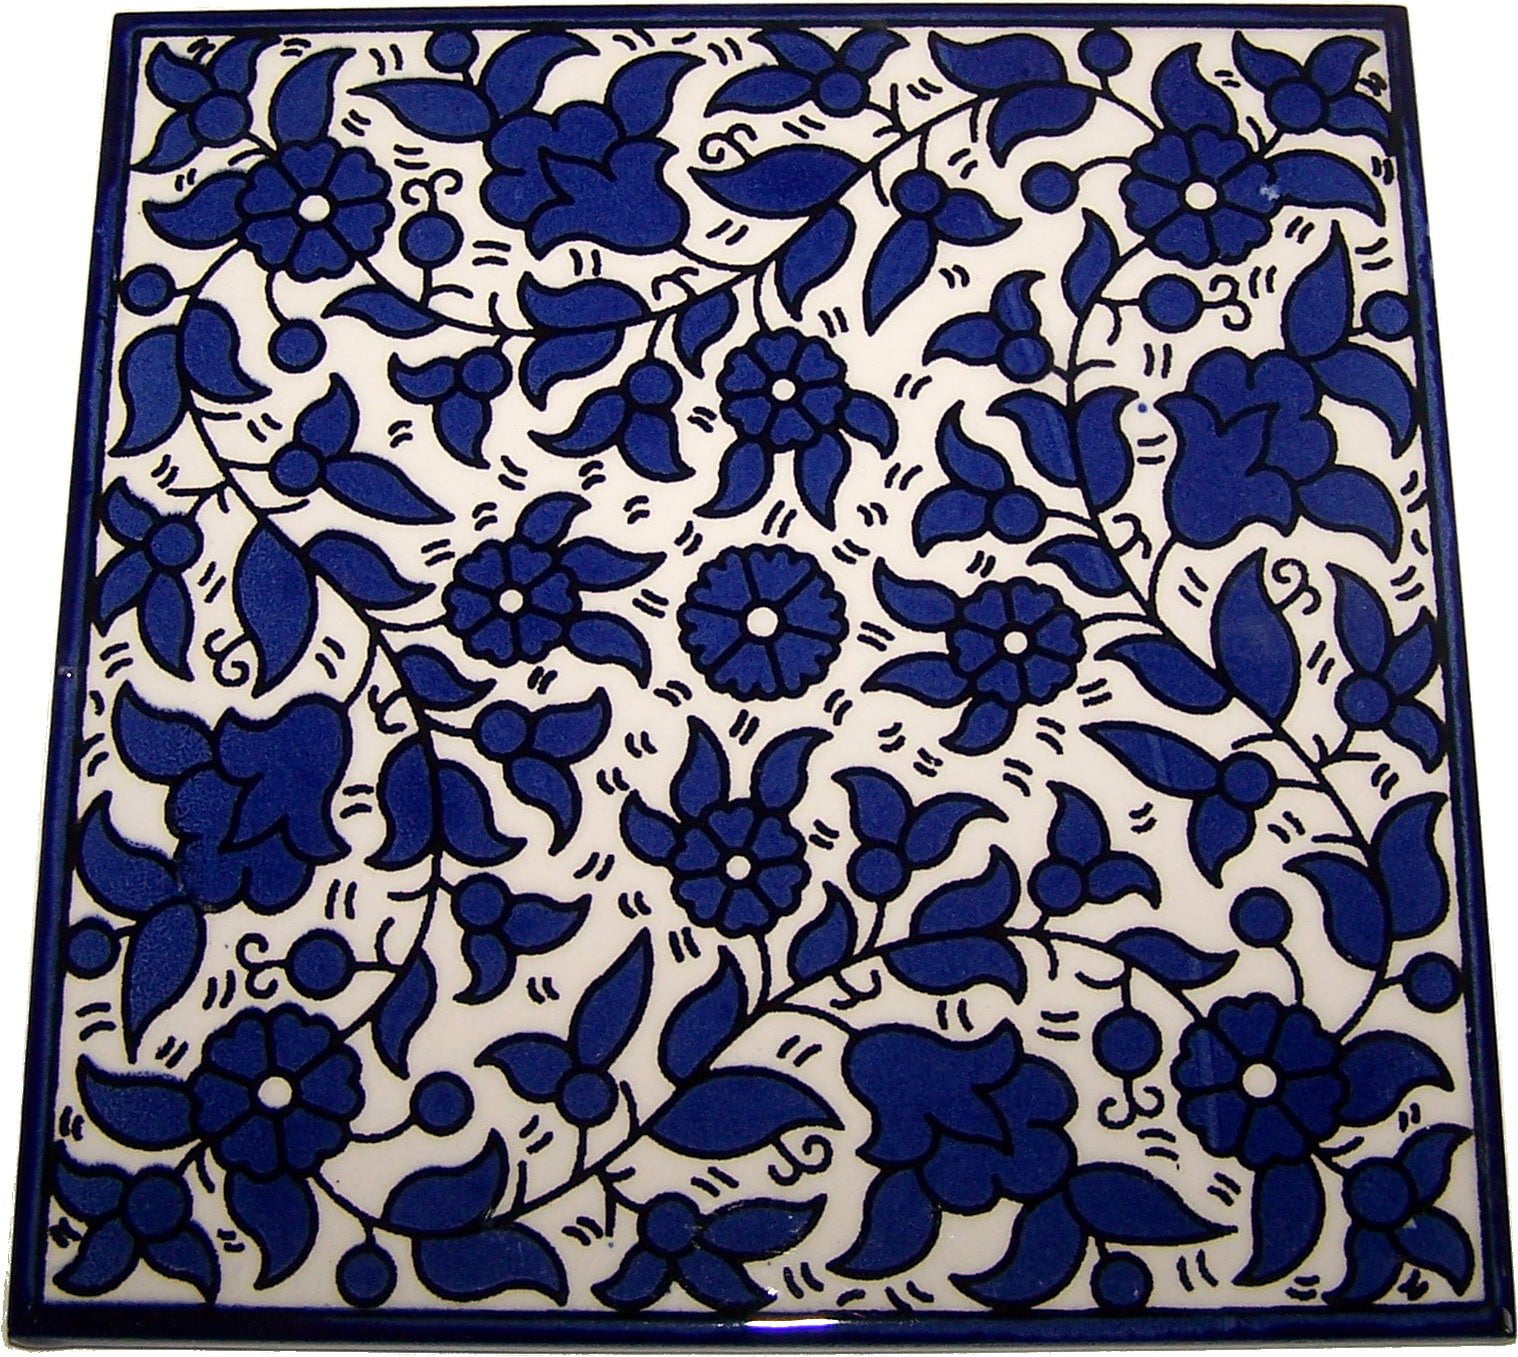 Modular Hand Painted Tile from Jerusalem Model V - 6 Inches - Asfour